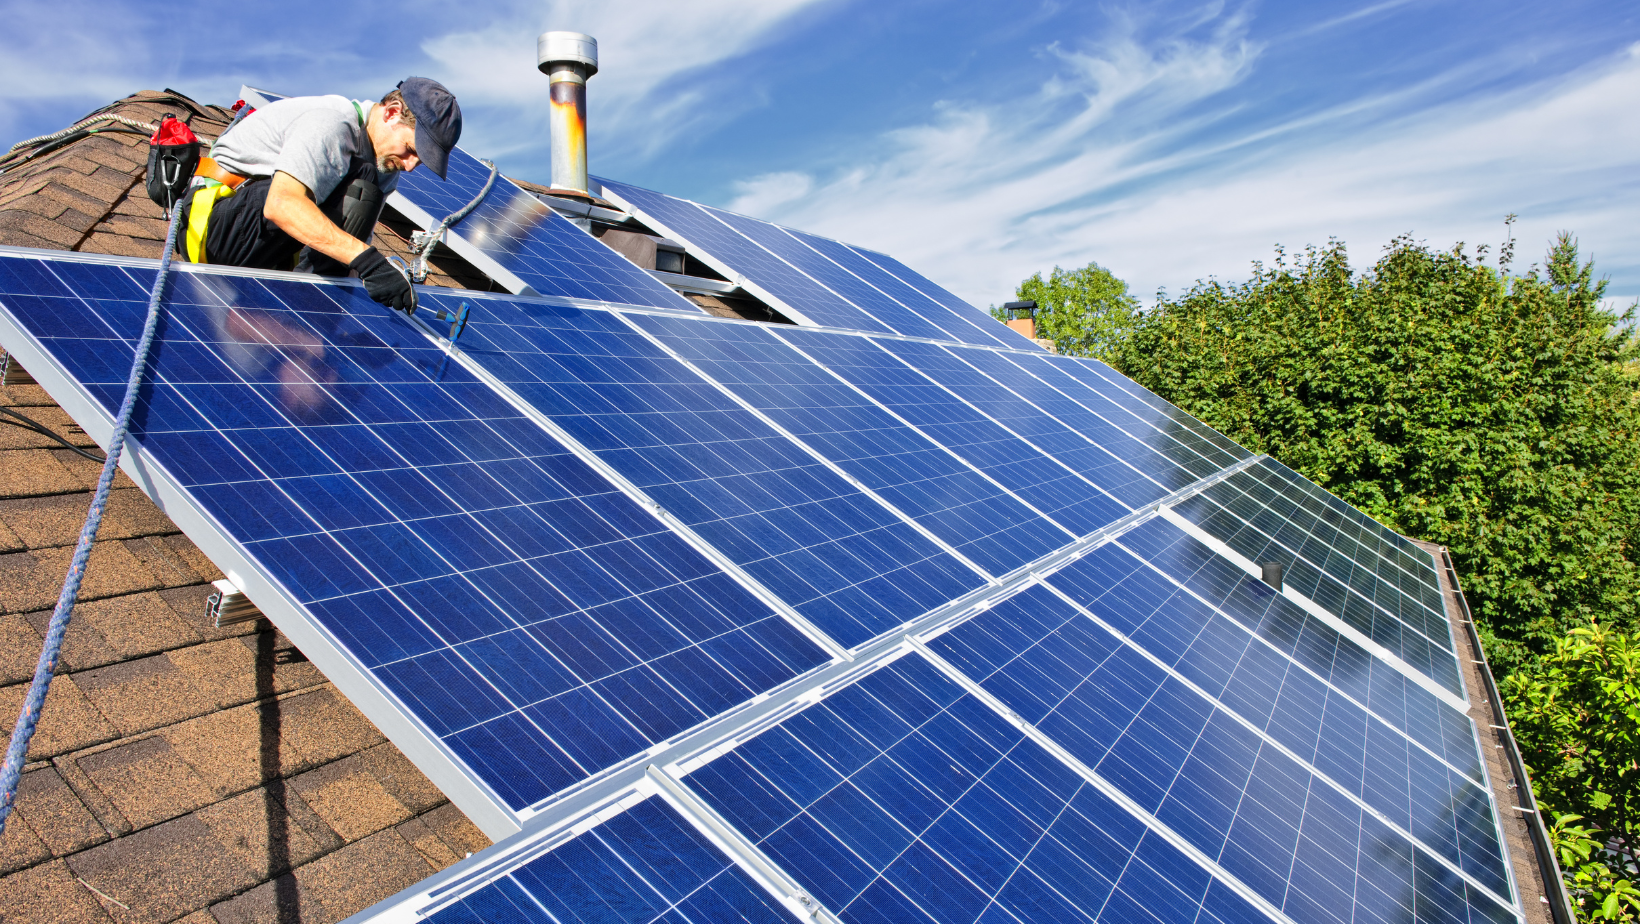 What Makes a Roof Good for Solar Panels?